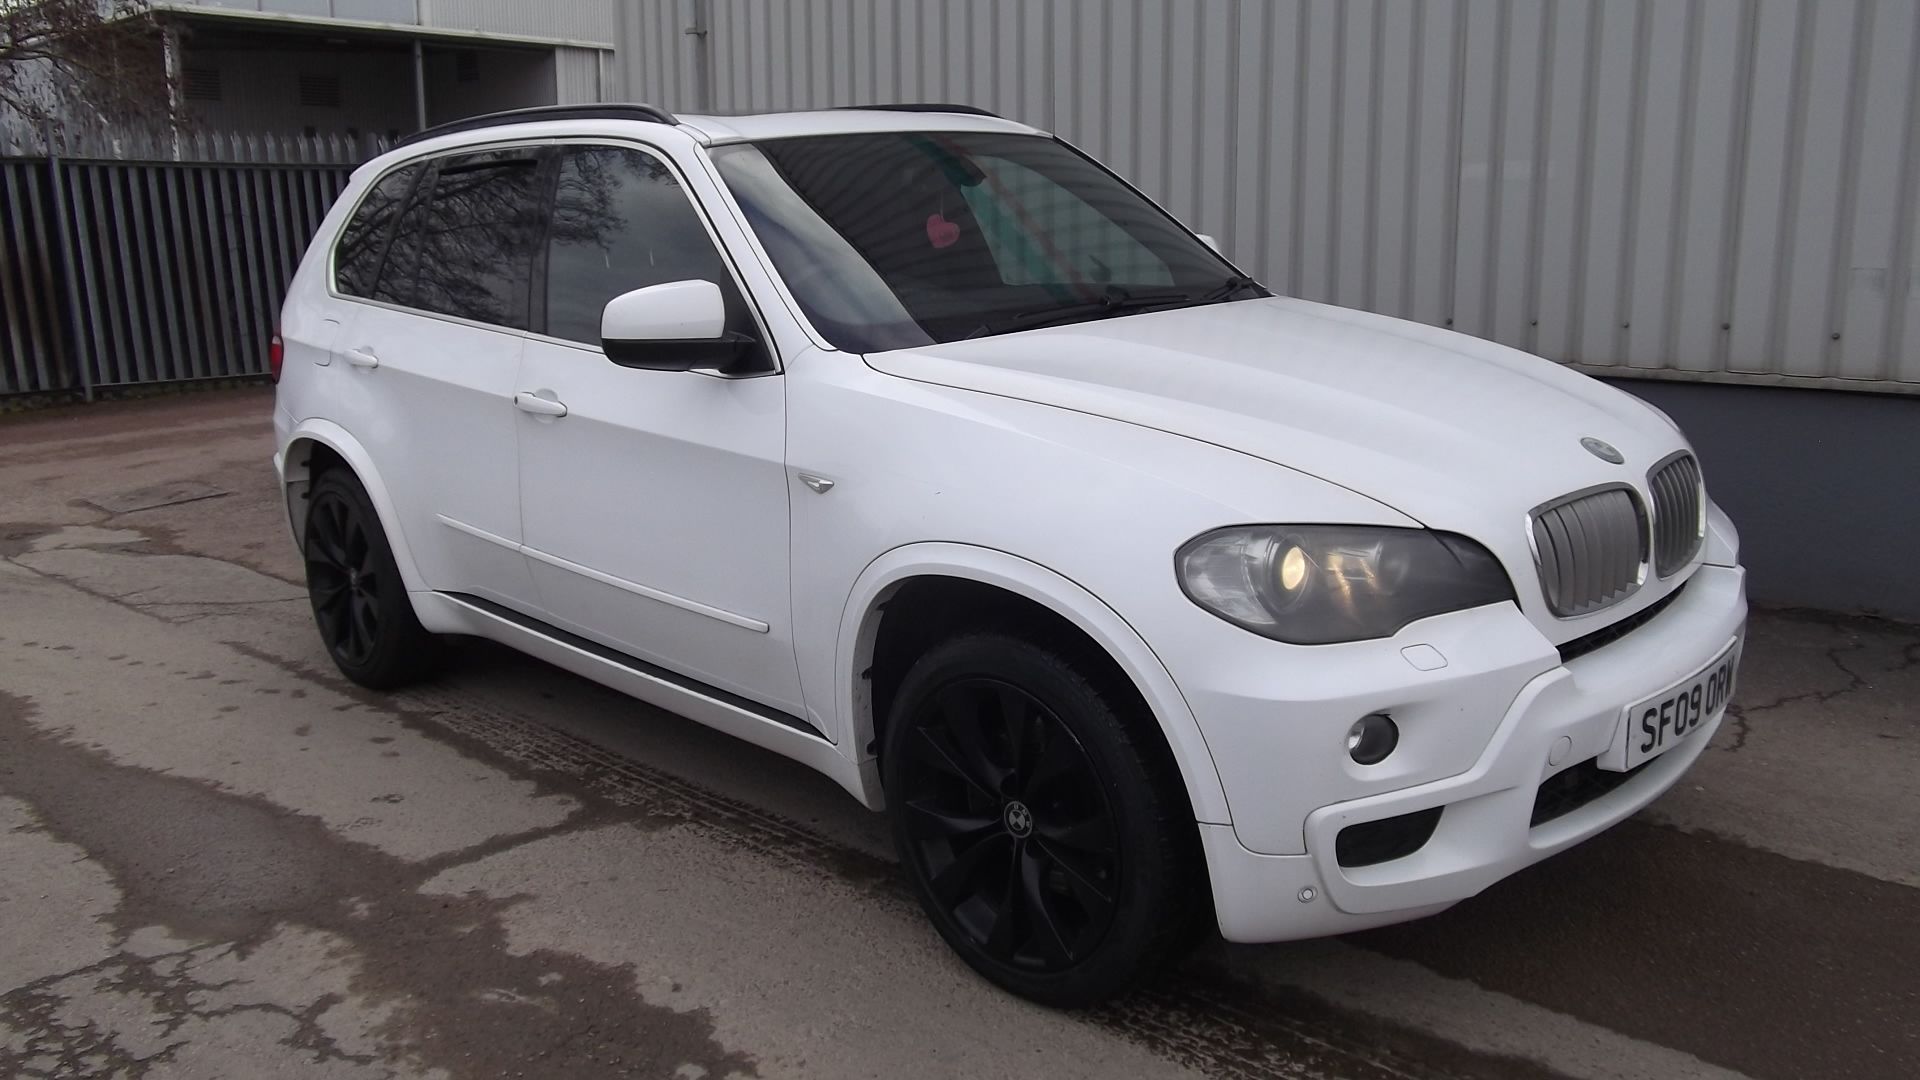 2009 BMW X5 35D M Sport X Drive 3.0 5 Dr 4x4 - CL505 - NO VAT ON THE HAMM - Image 2 of 22